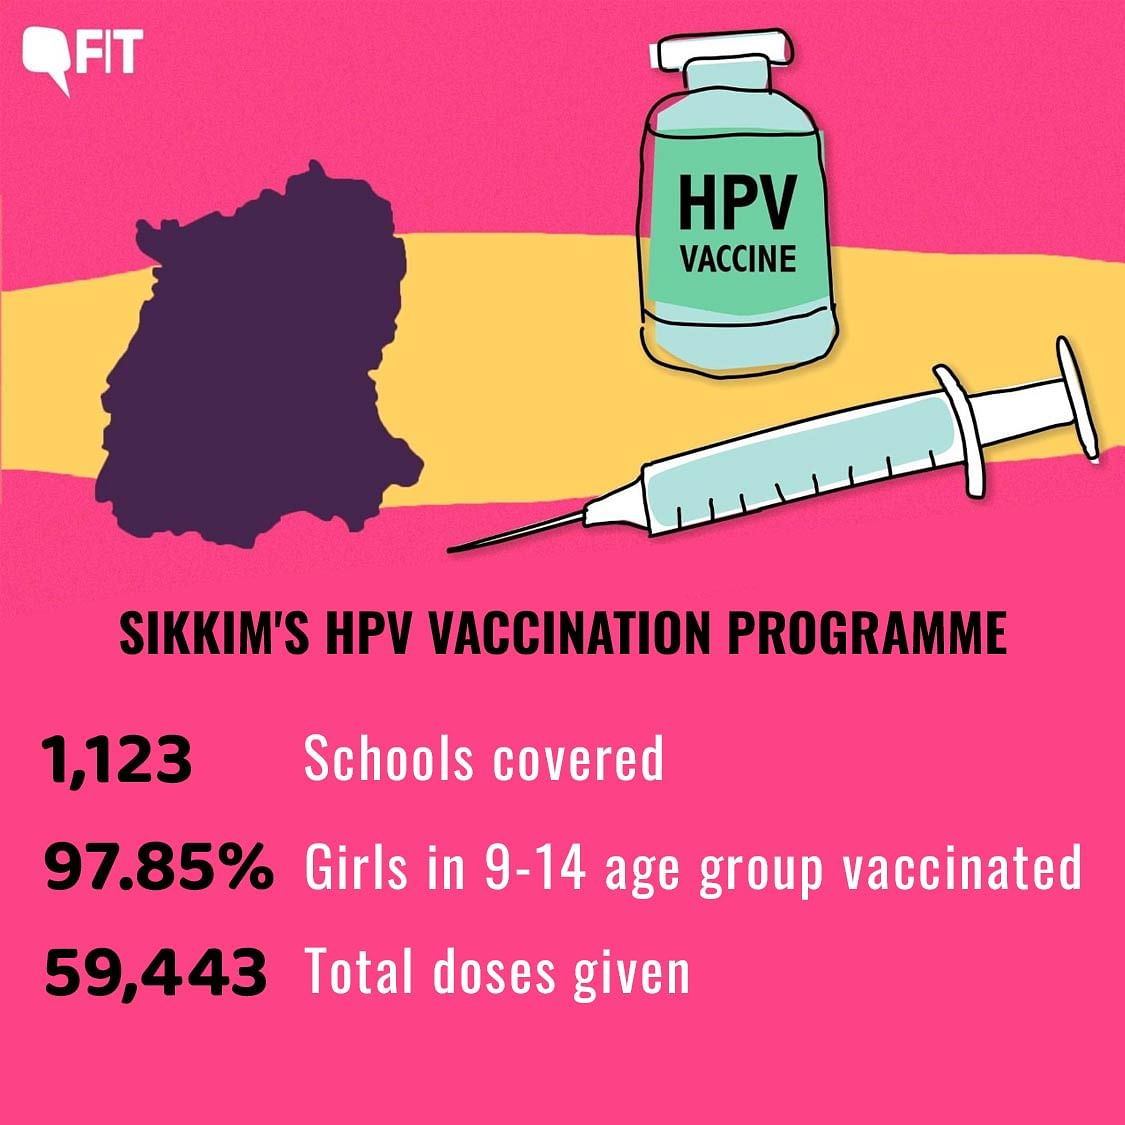 Cervical Cancer Awareness Month: More so, how did Sikkim convince parents of girls to take the HPV vaccine?